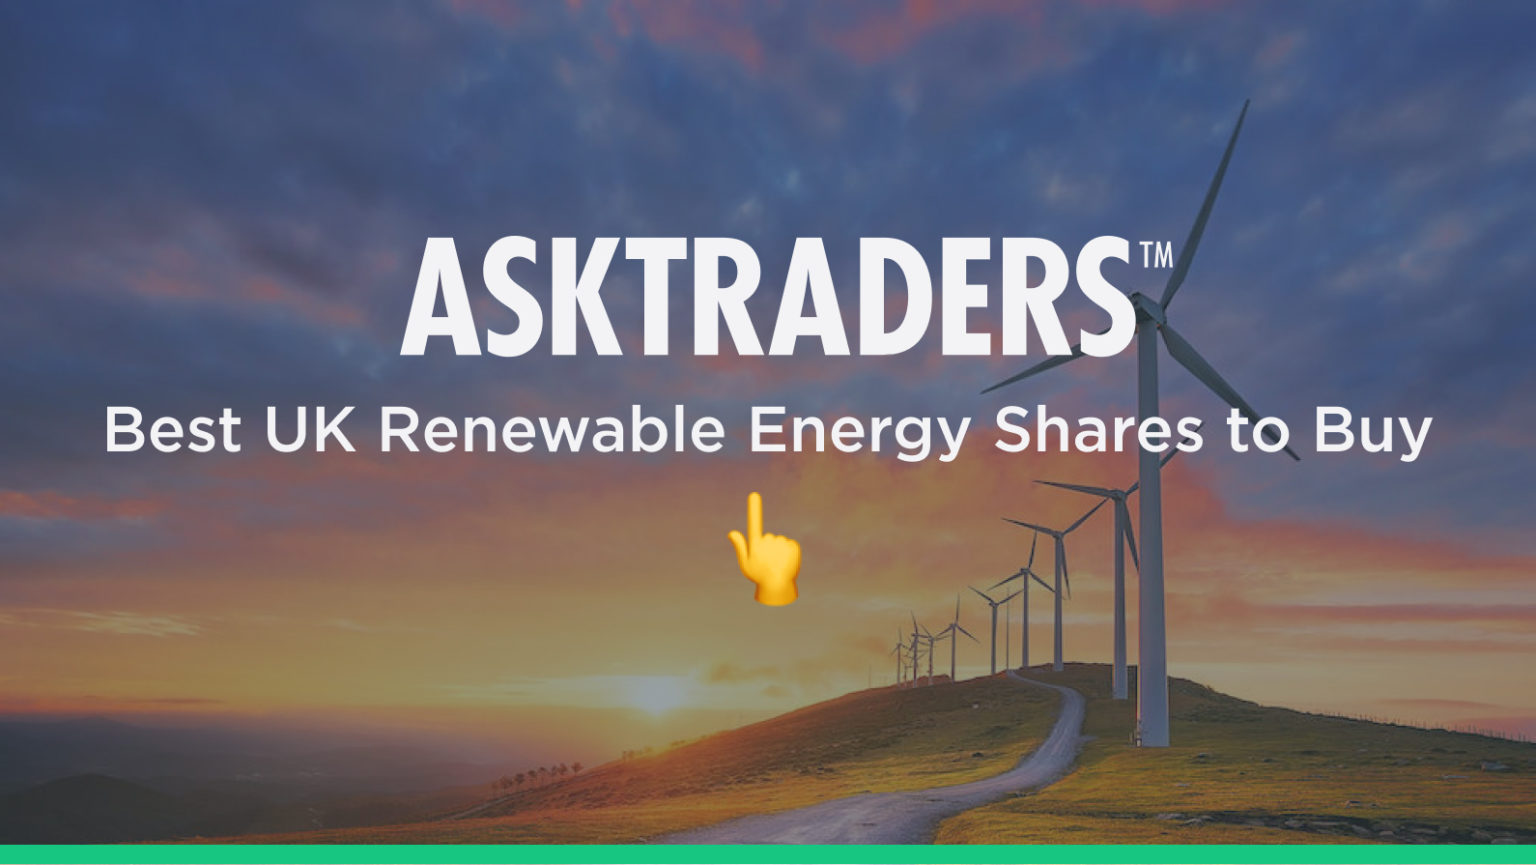 The Best UK Renewable Energy Shares (To Buy in 2021)